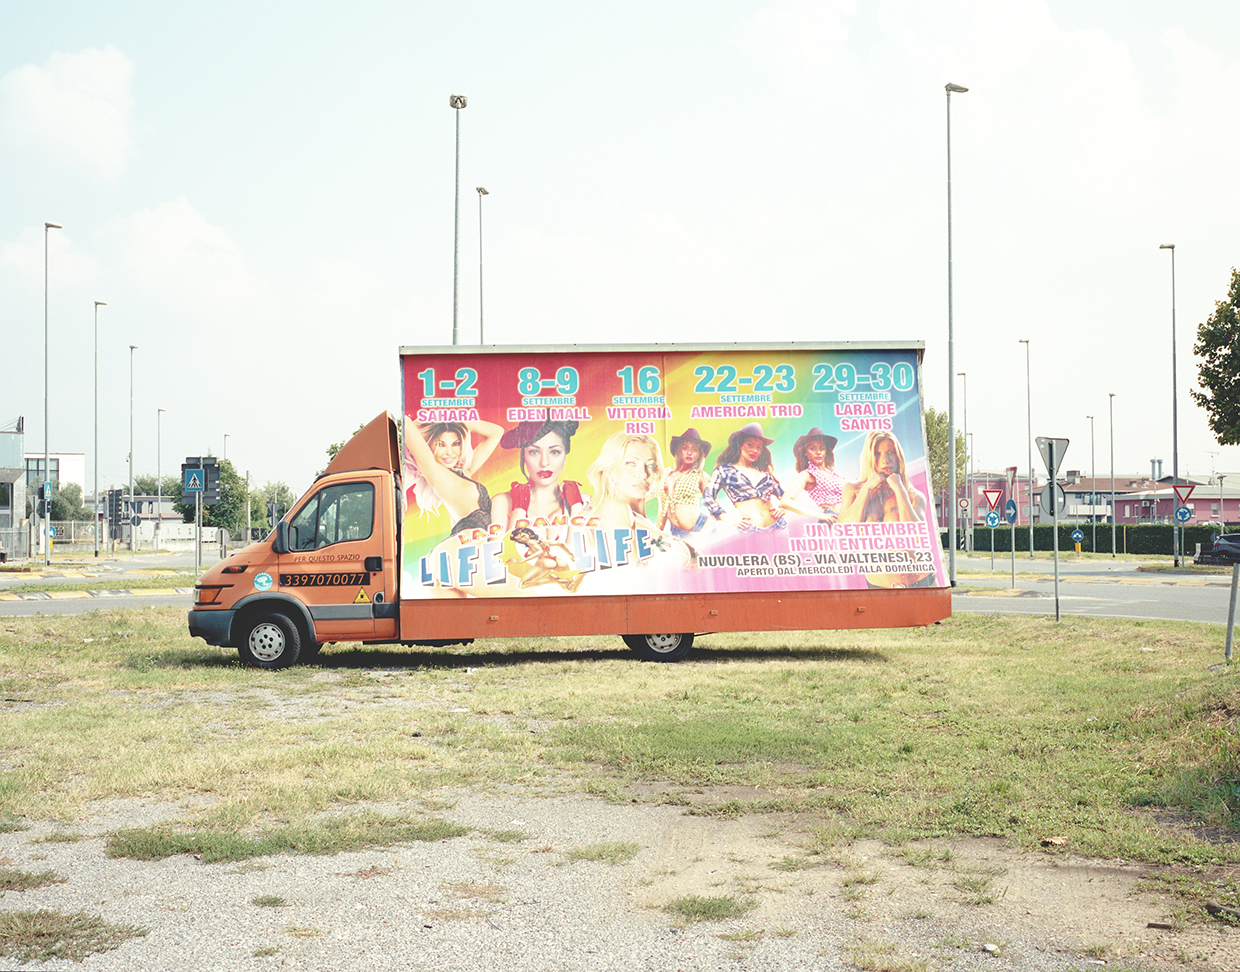  Lonato, Italy, 2017
A mobile advertisment truck of a sex show in the province of Brescia 